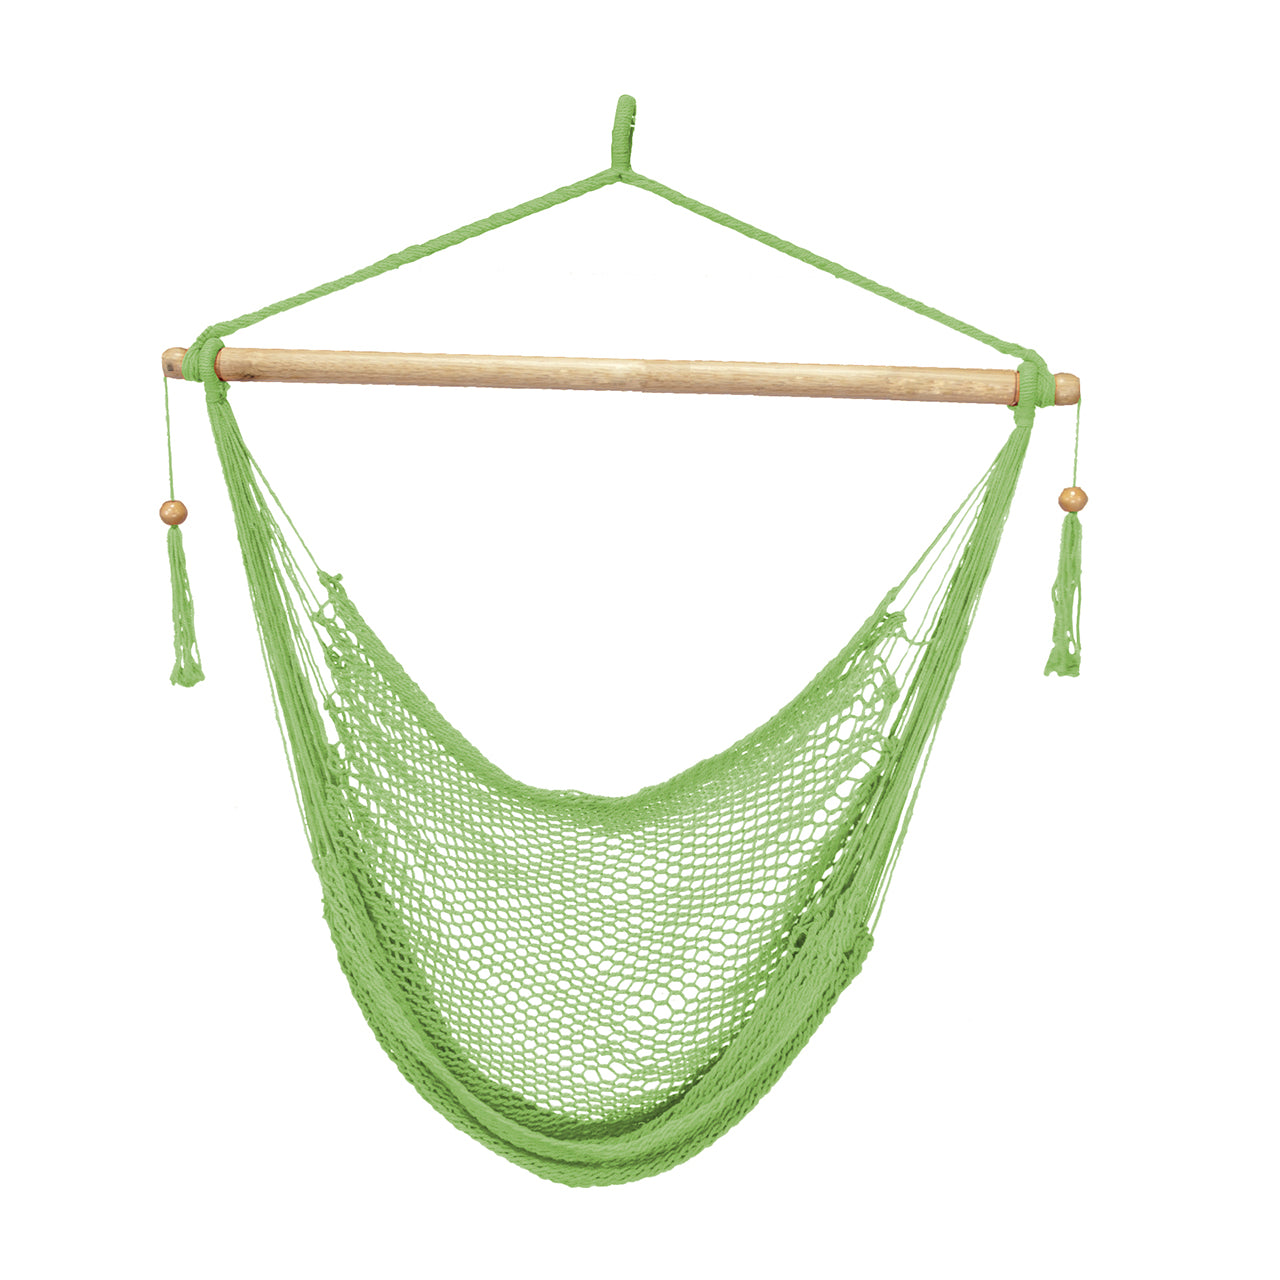 Bliss Hammocks 40-inch Island Rope Hammock Chair with Hanging Hardware and Spreader Bar in the light green variation.